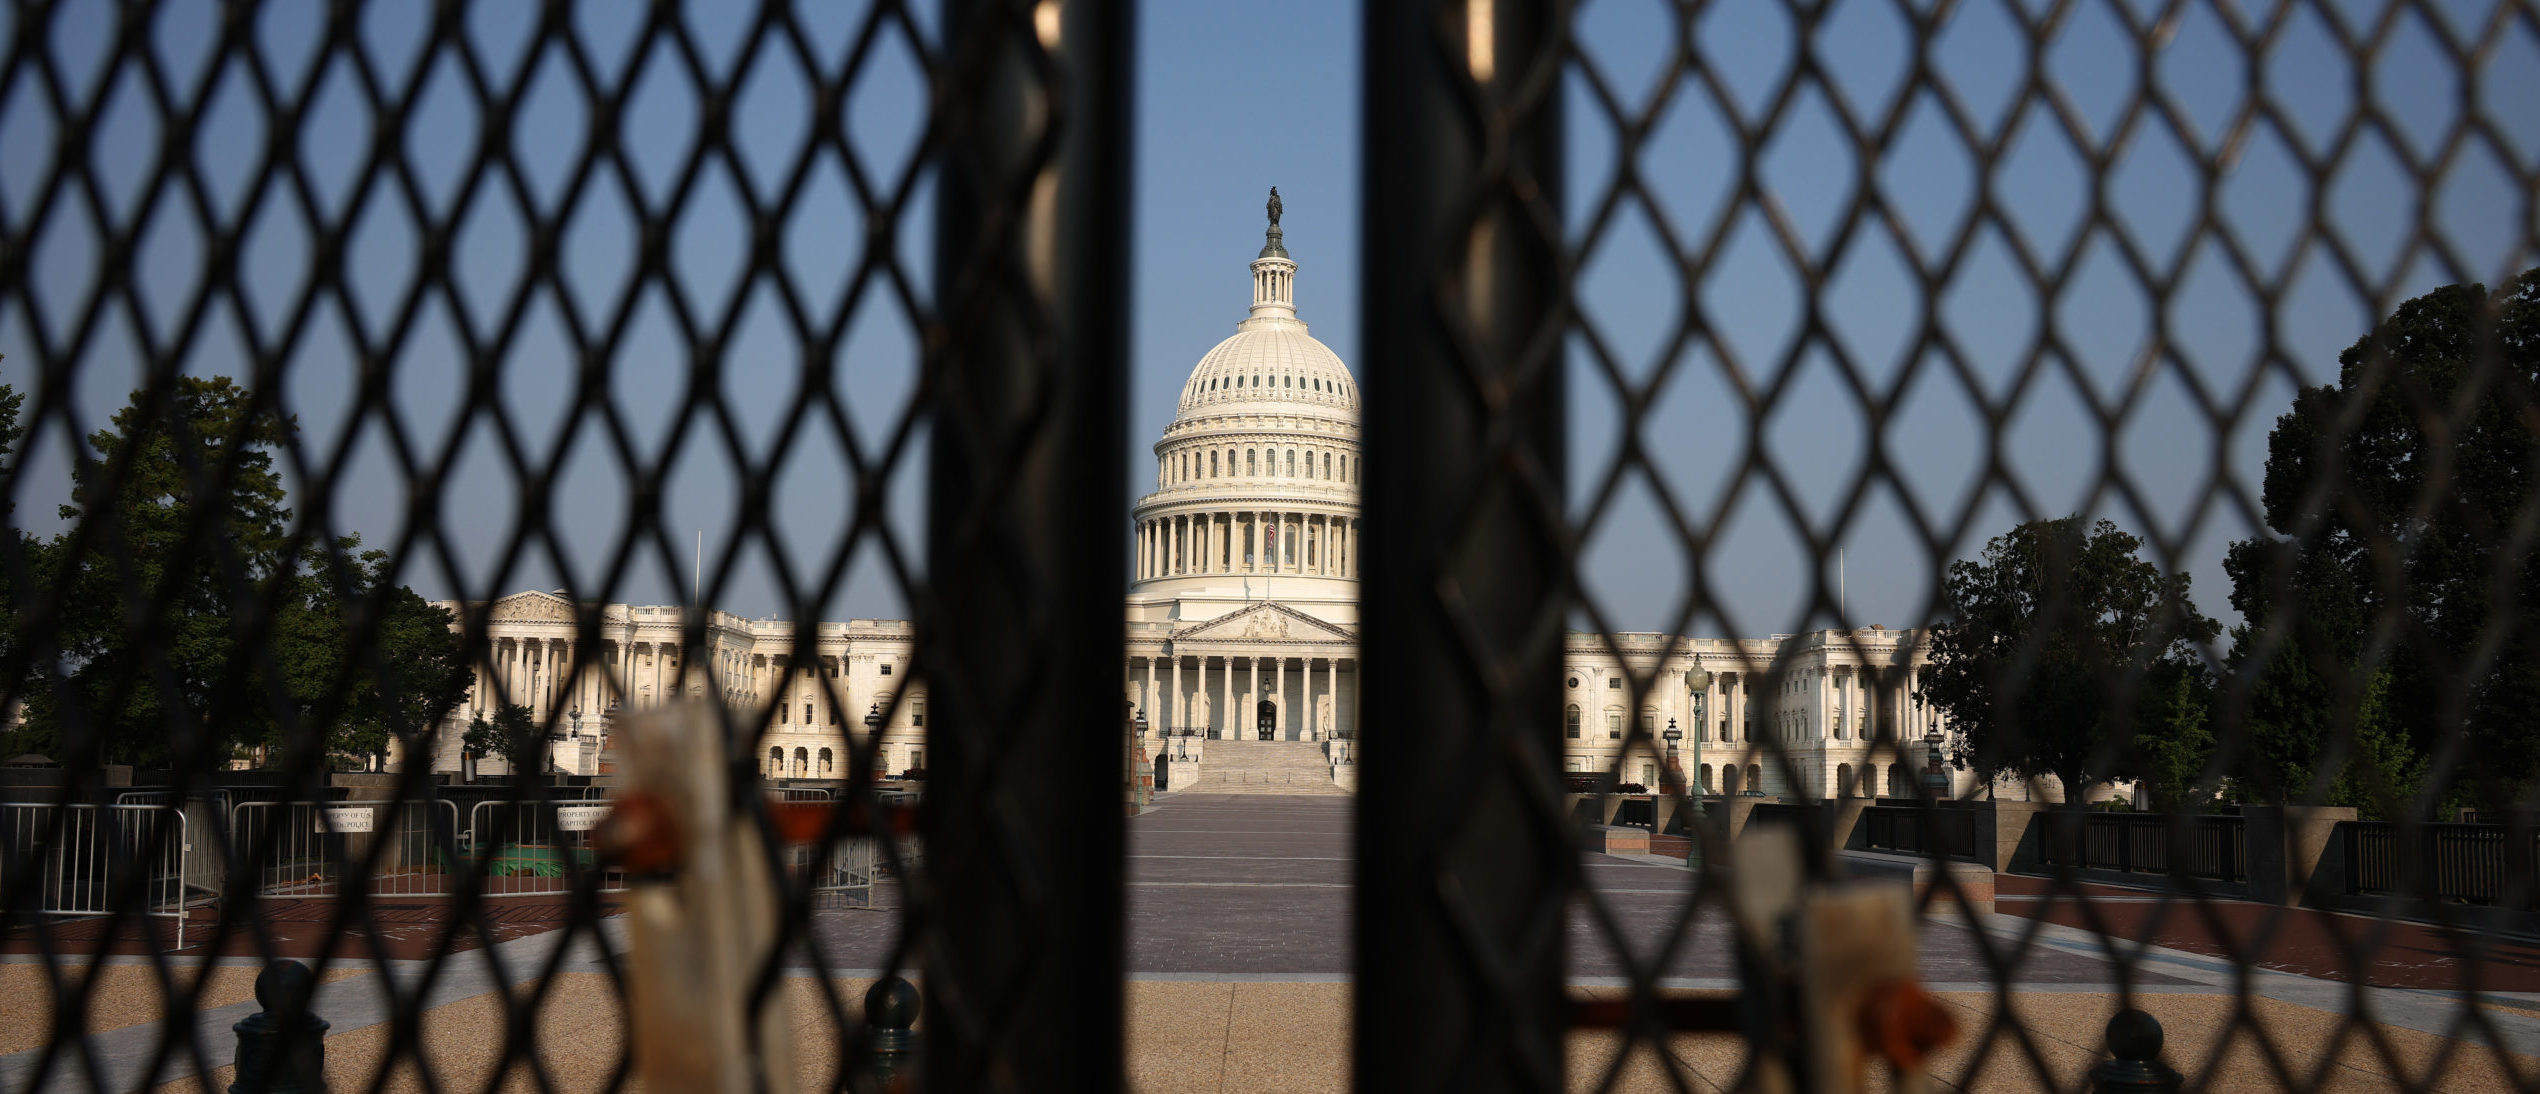 WASHINGTON, DC - JULY 06: The U.S. Capitol is seen behind security fencing on July 06, 2021 in Washington, DC. According to recent media reports, the remaining fencing that has surrounded the U.S. Capitol following the January 6 riot will come down sometime this week. (Photo by Anna Moneymaker/Getty Images)